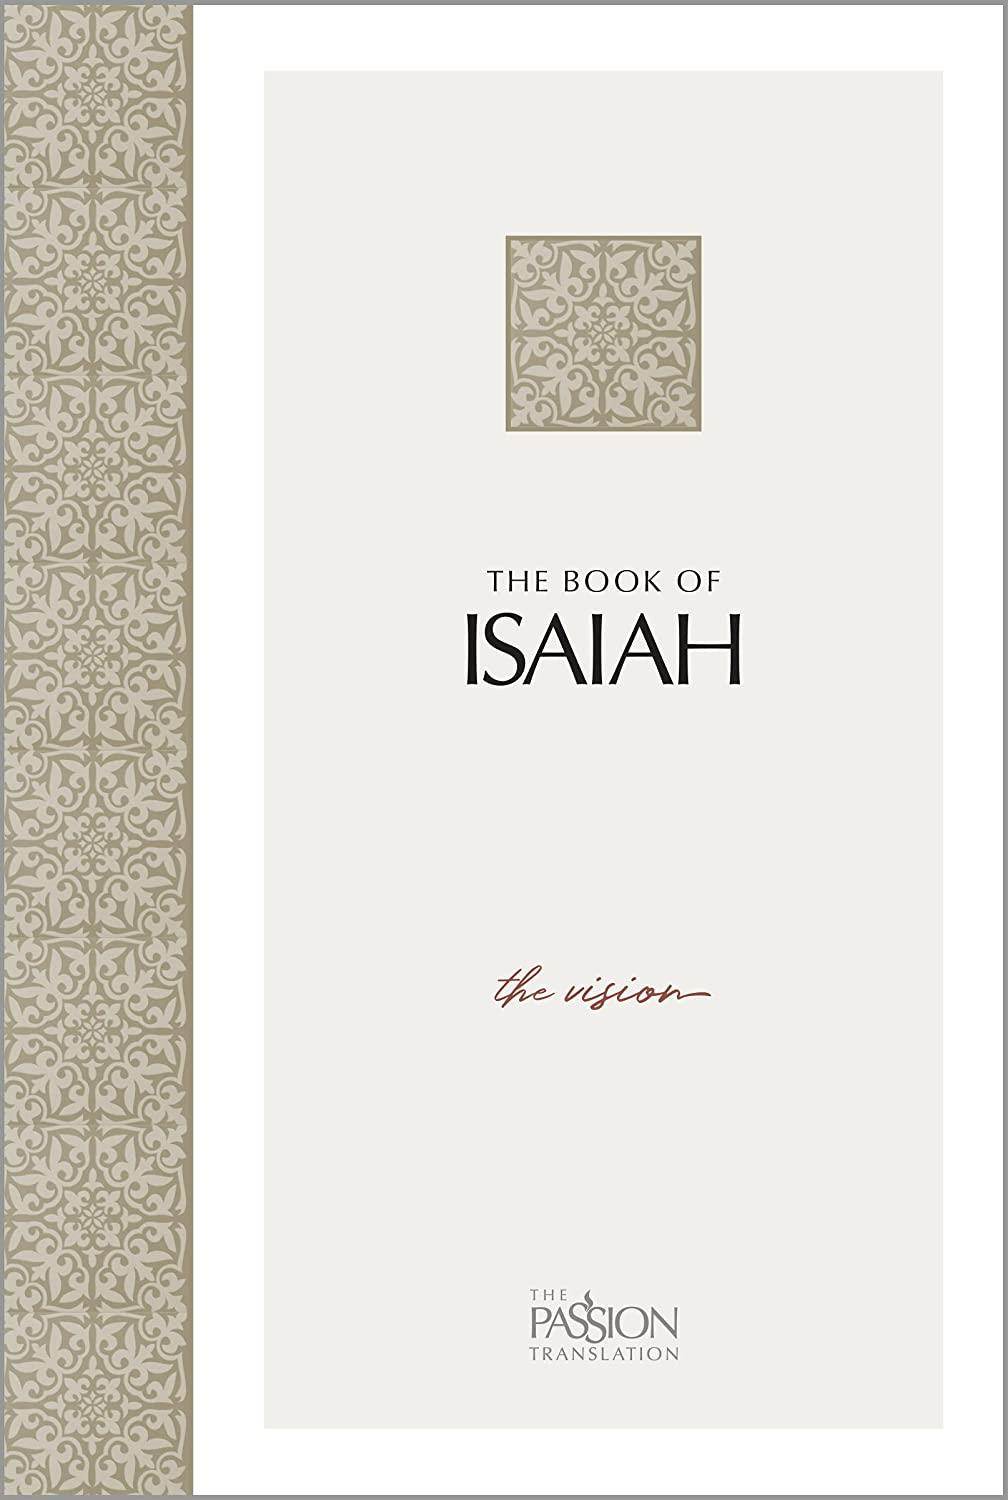 The Book of Isaiah: The Vision (The Passion Translation, Paperback) &ndash; A Heartfelt Bible Translation of the Book of Isaiah, Makes a Great Gift for Confirmation, Holidays, and More